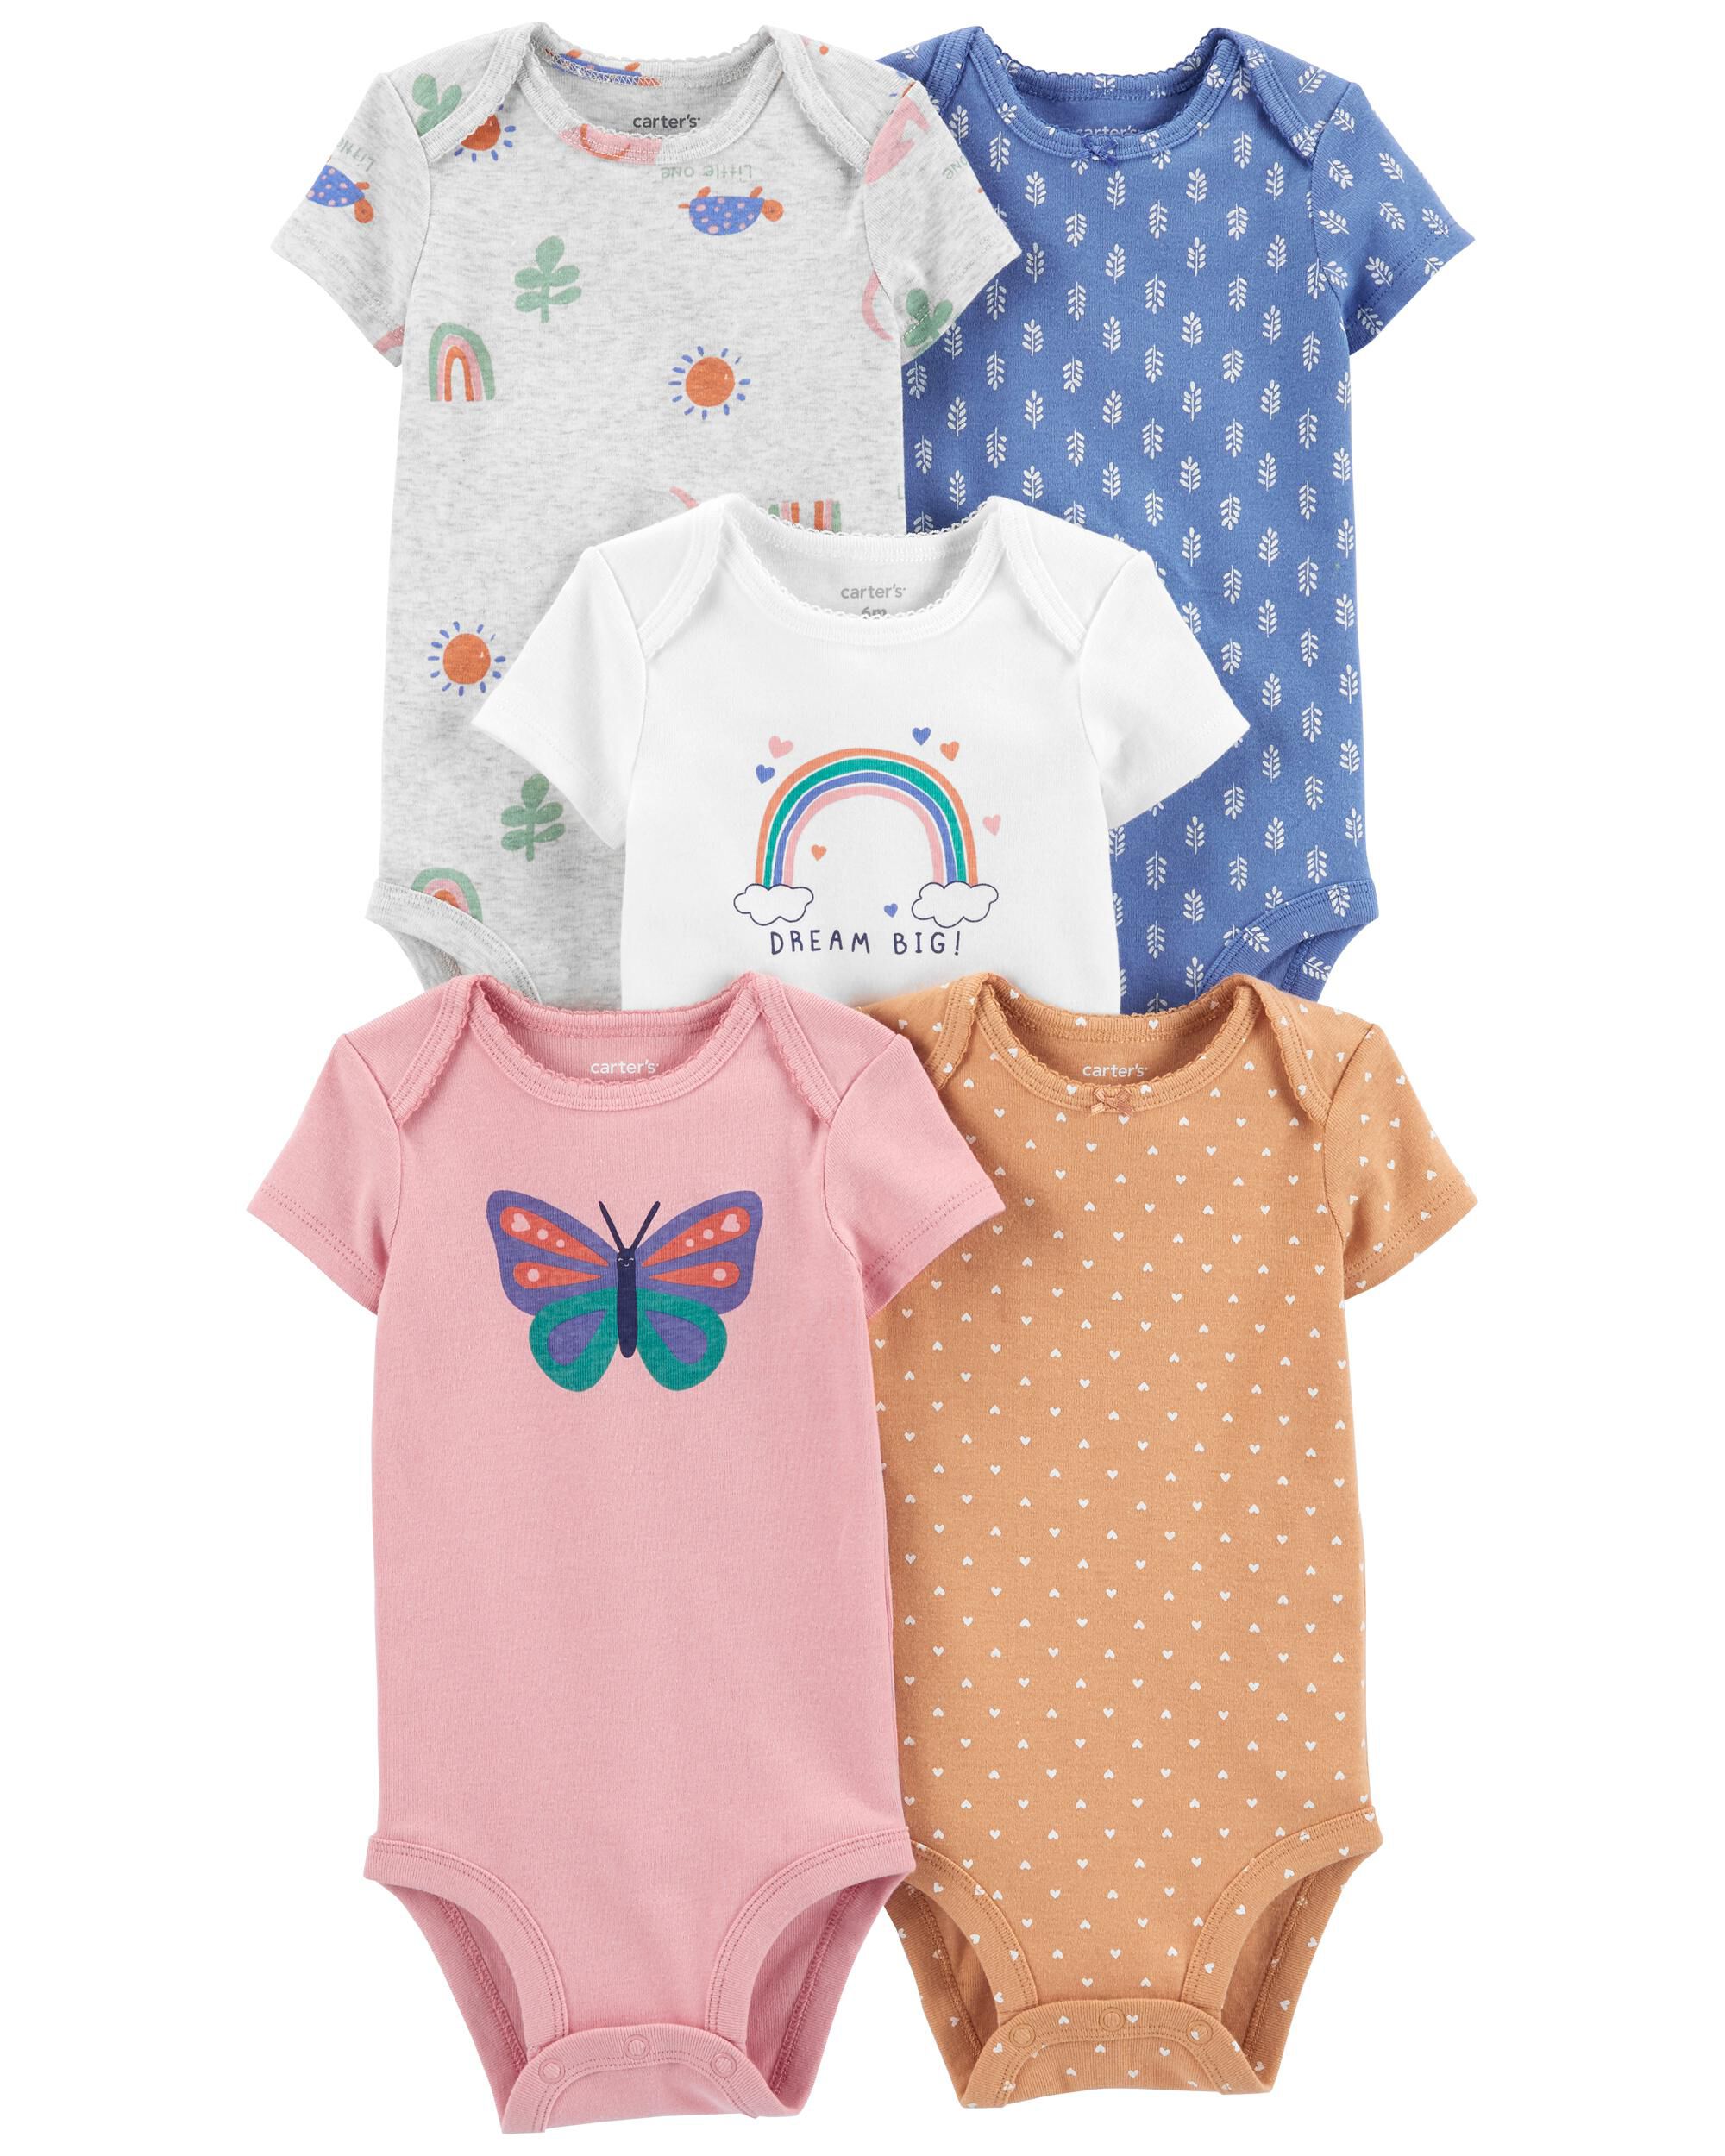 Carters Infant Girls TWO Bodysuits Love You Lots & pastel Stripes NWT 